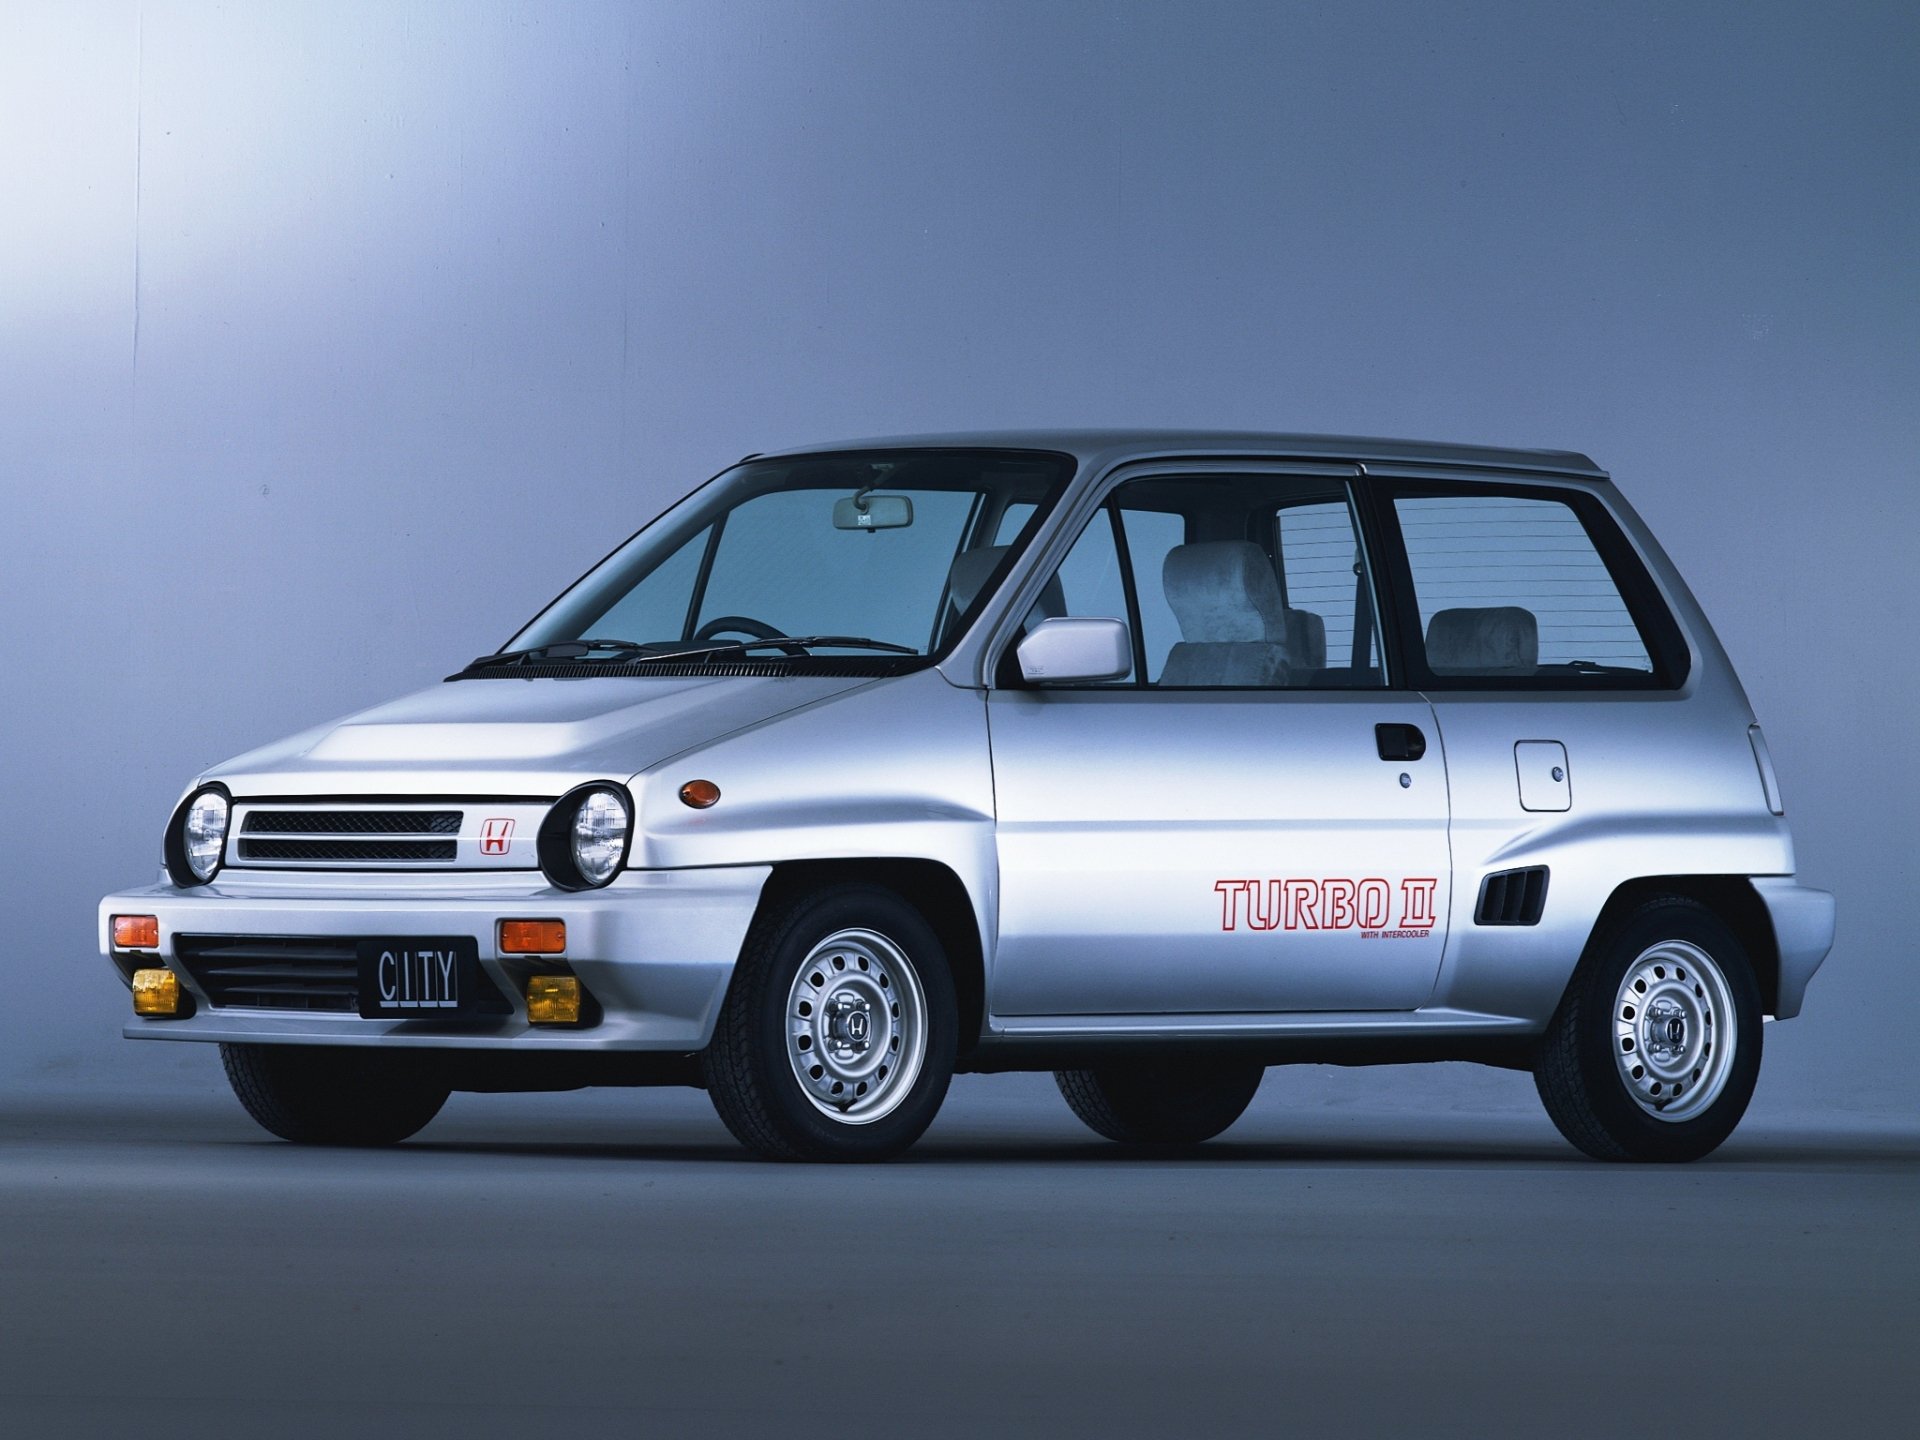 Honda City Turbo II HD Wallpapers and Backgrounds